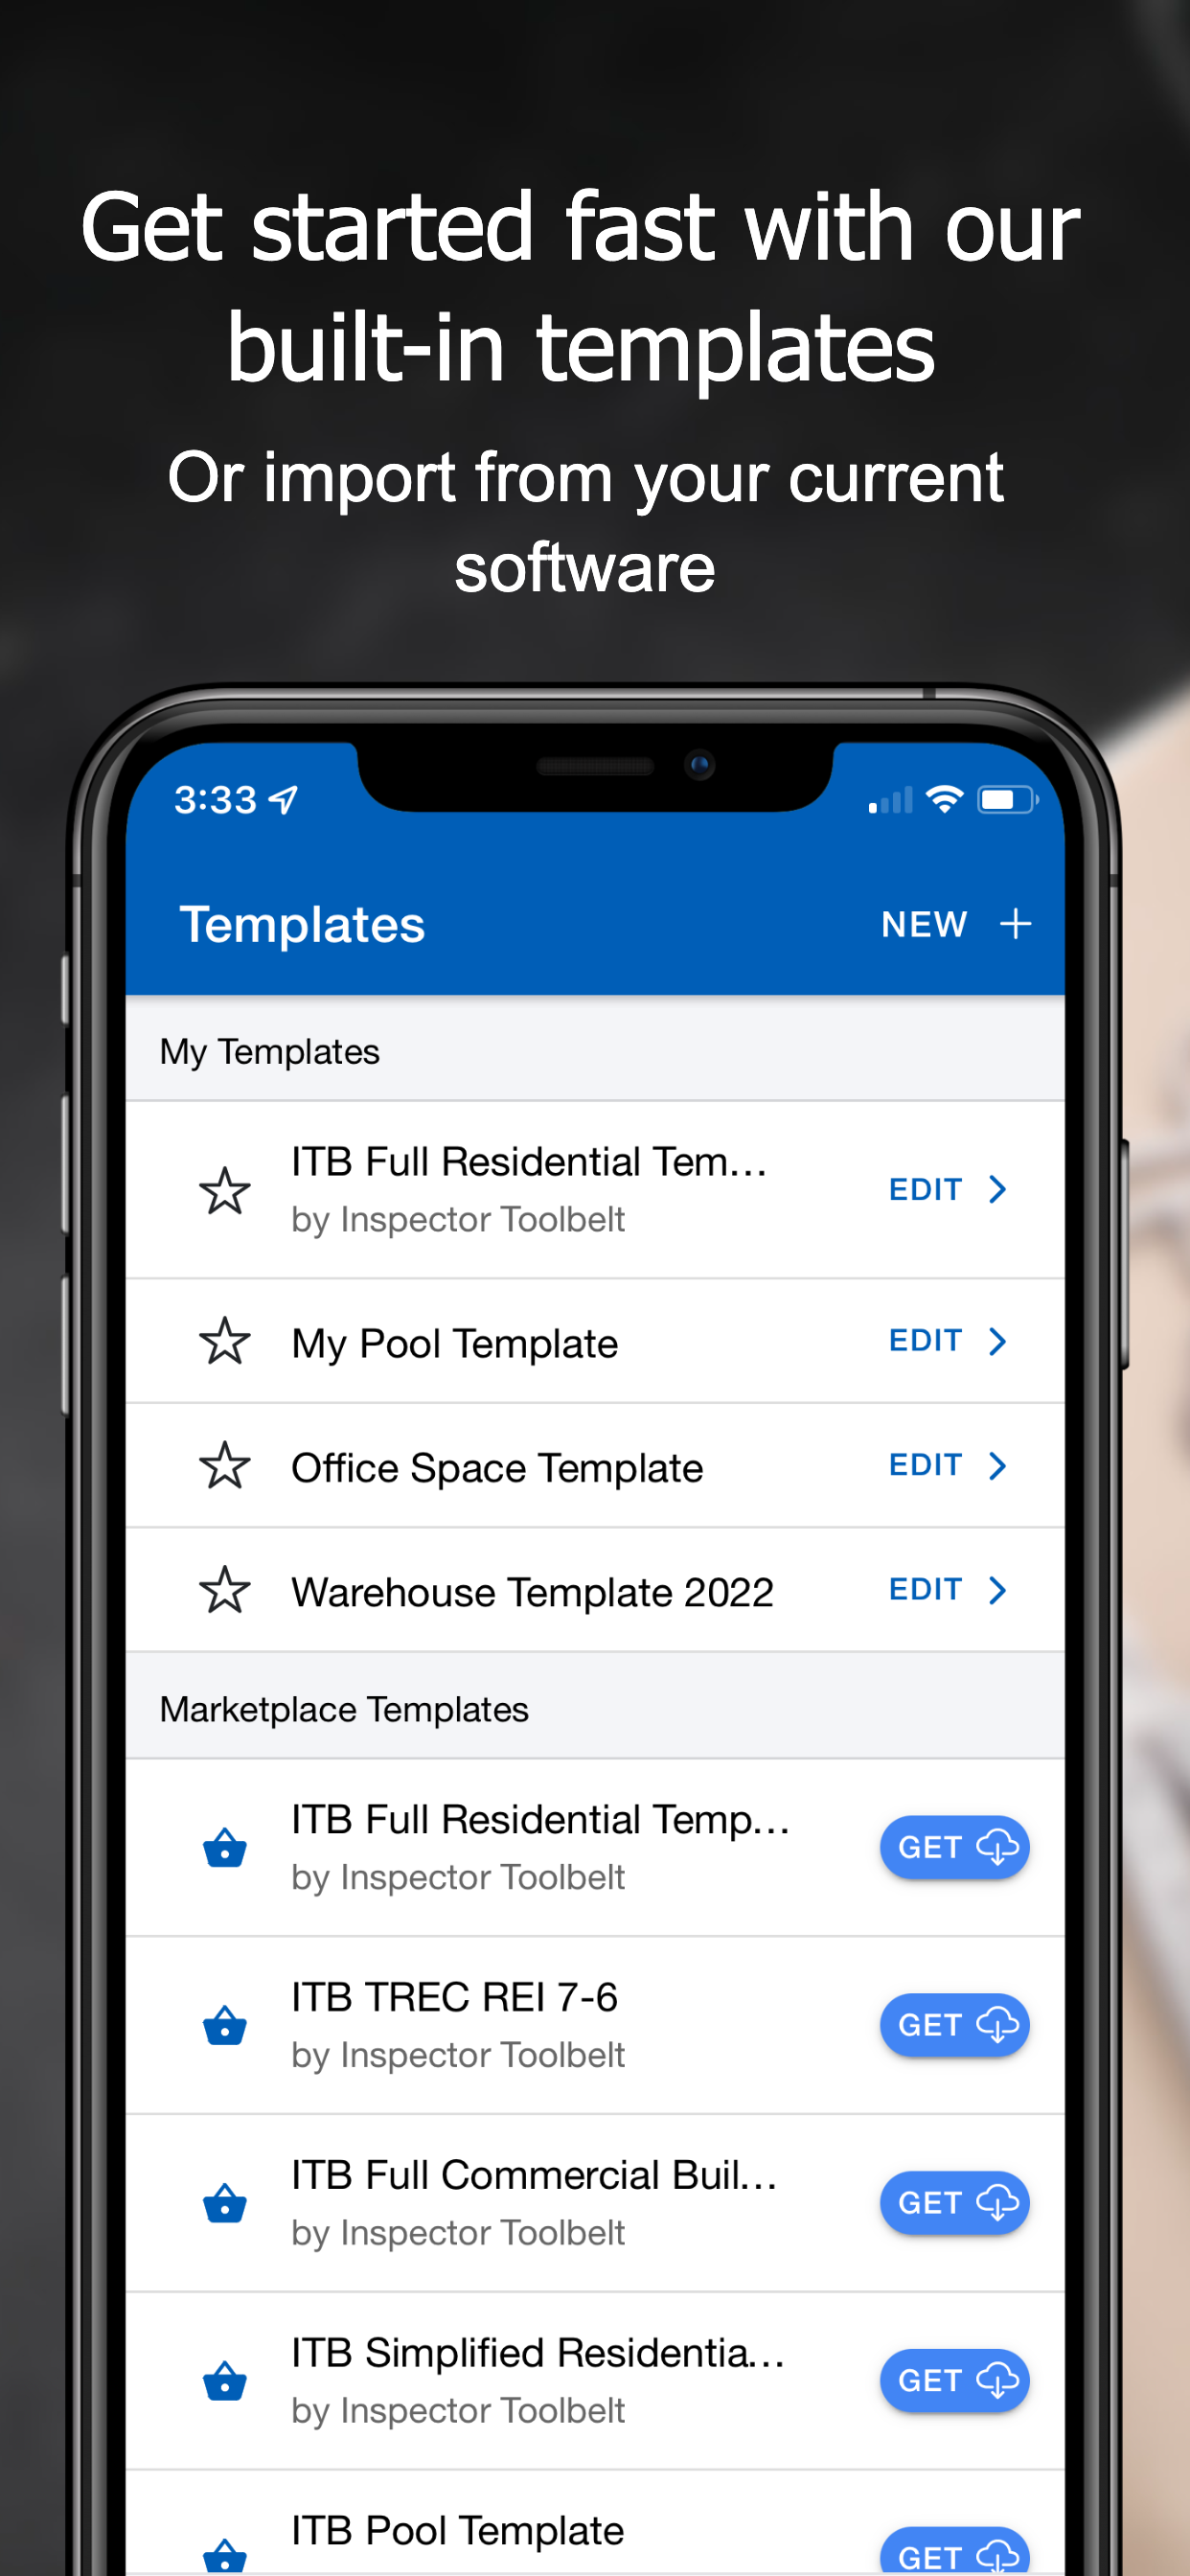 Get started fast with our built-in templates